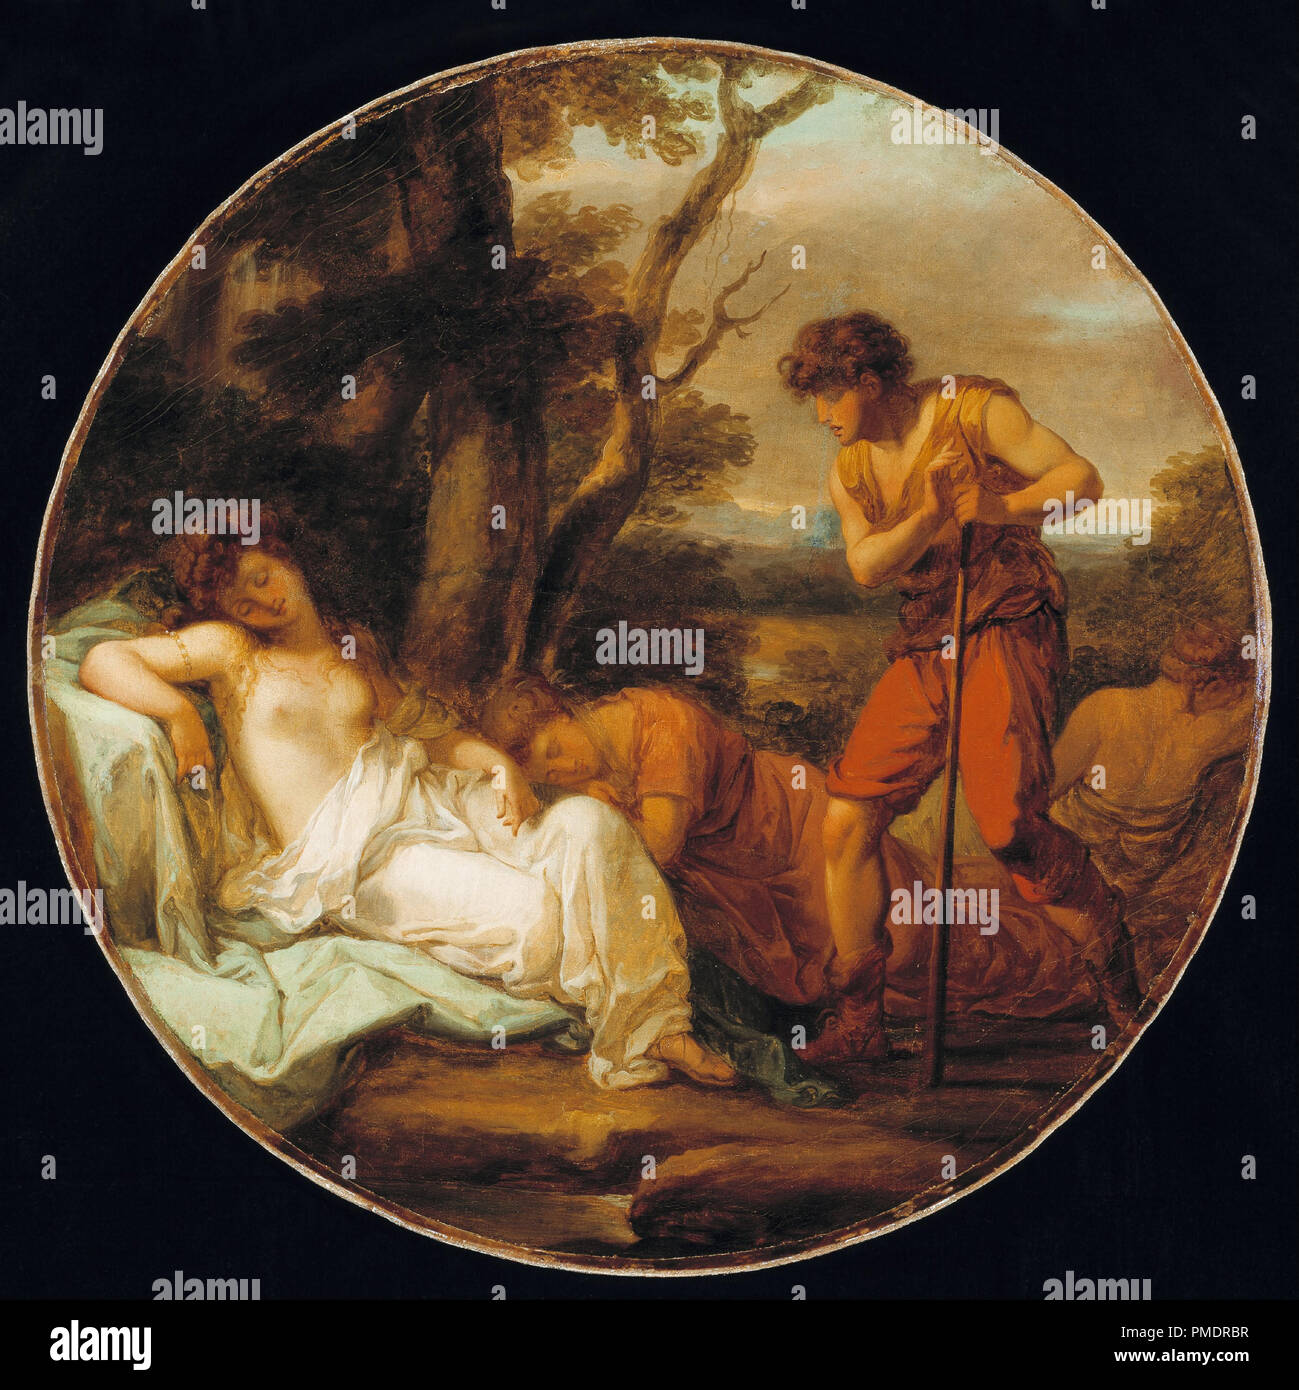 Cymon and Iphigenia. Date/Period: Ca. 1780. Painting. Oil on canvas. Diameter: 24.5 in (62.2 cm). Author: Angelica Kauffman. KAUFFMANN, ANGELICA. Stock Photo